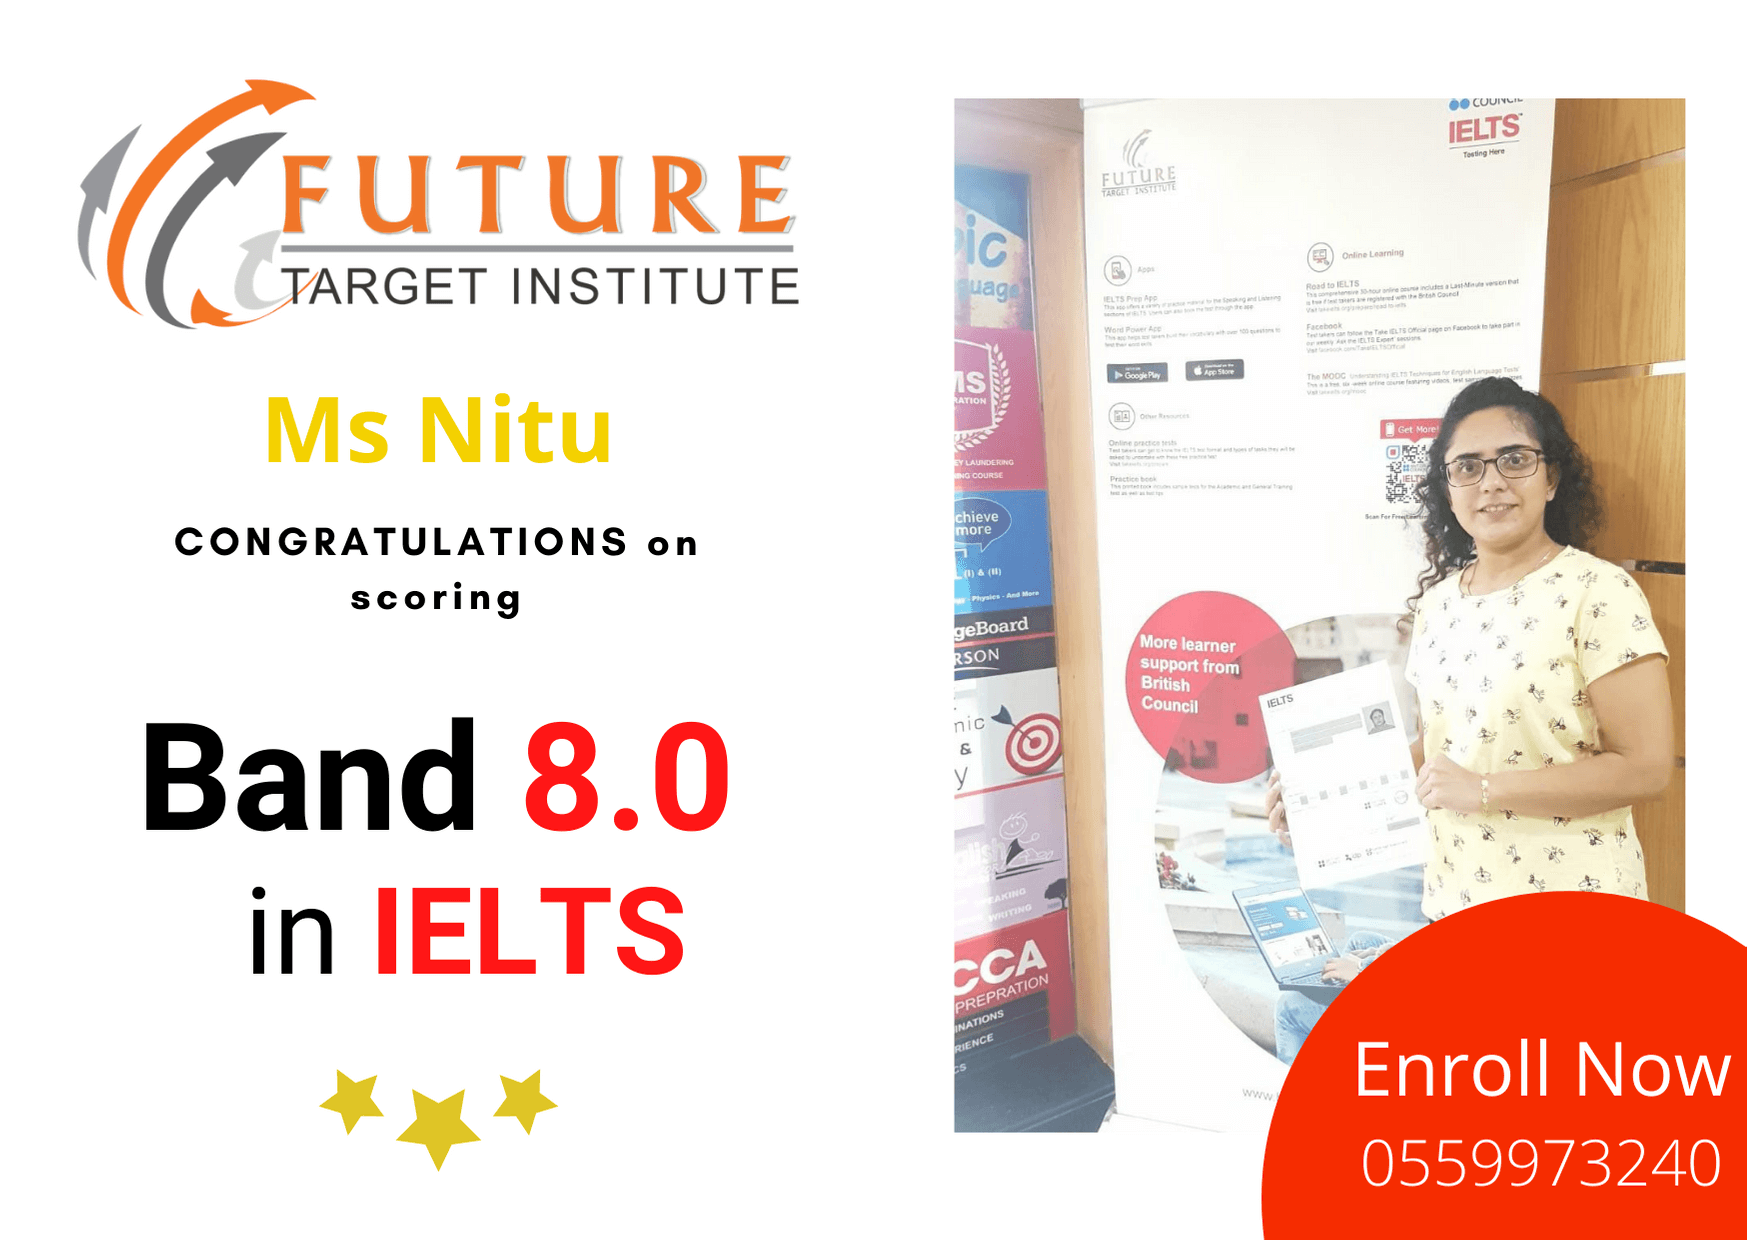 A picture of our team who help students achieve their dreams and assist with IELTS Exam Booking at Future Target Institute in Al Nahda 2, Dubai.